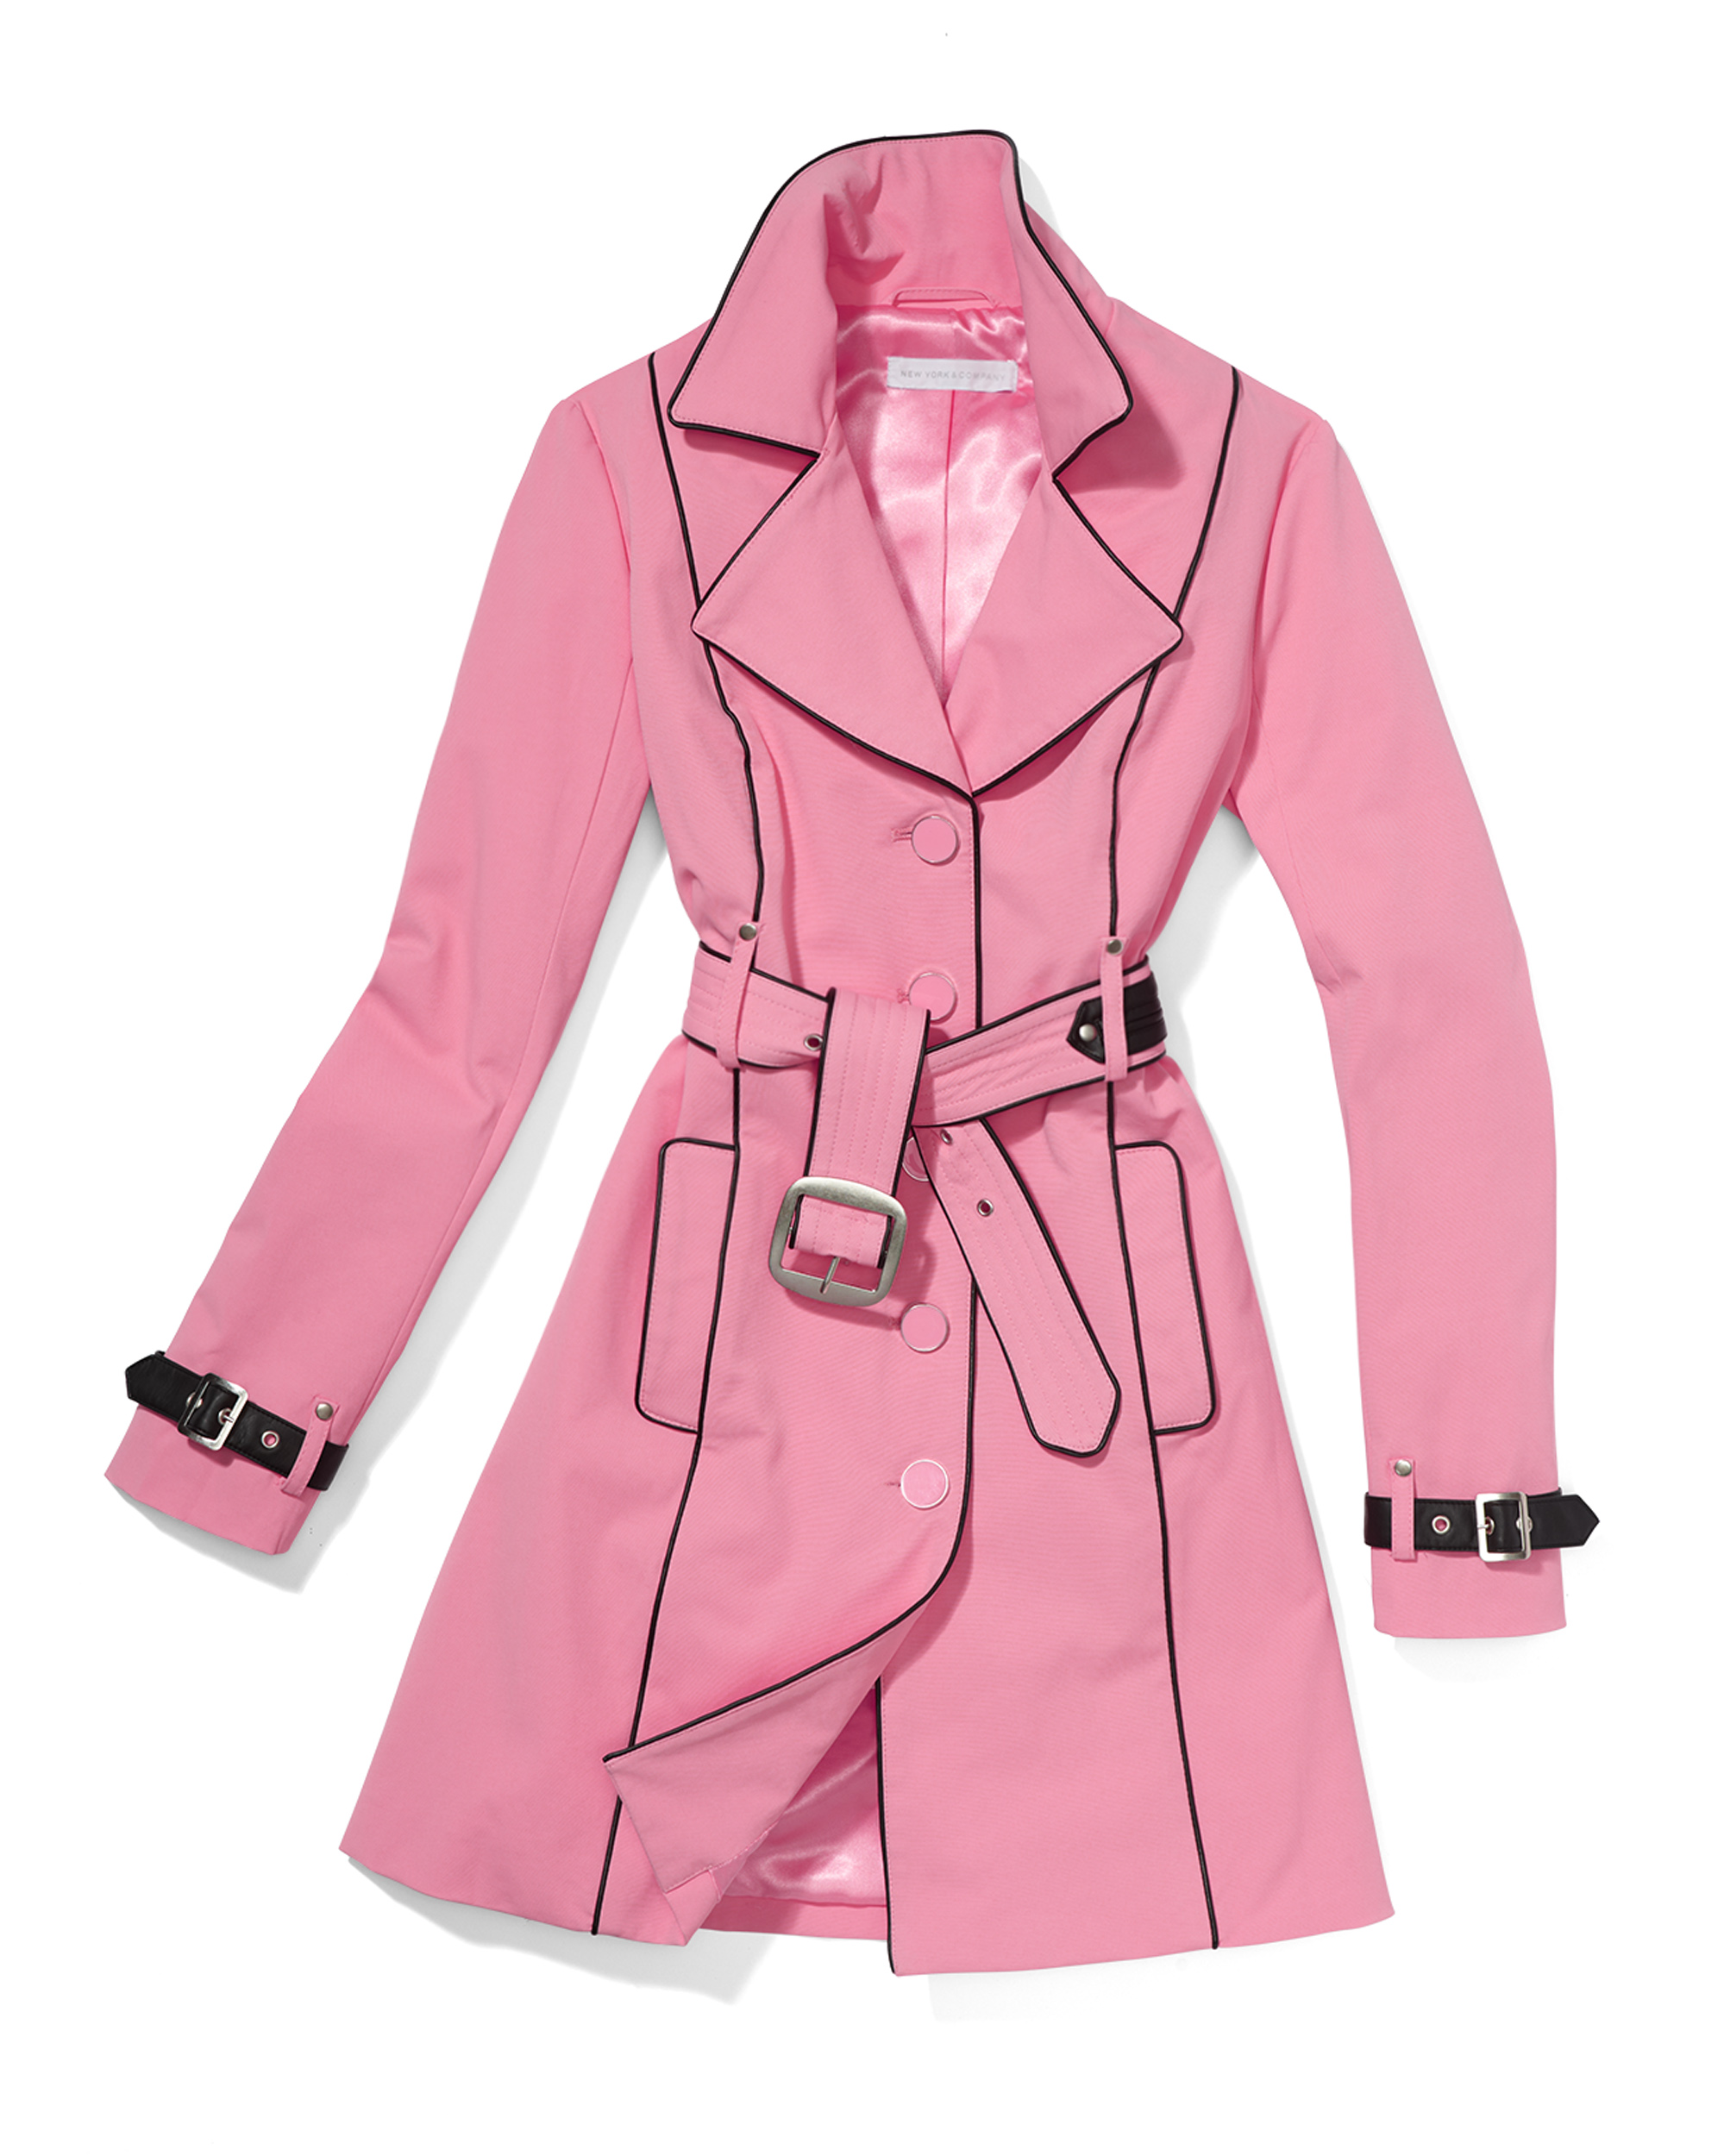 a product photograph of a pink trench coat with soft styling on white